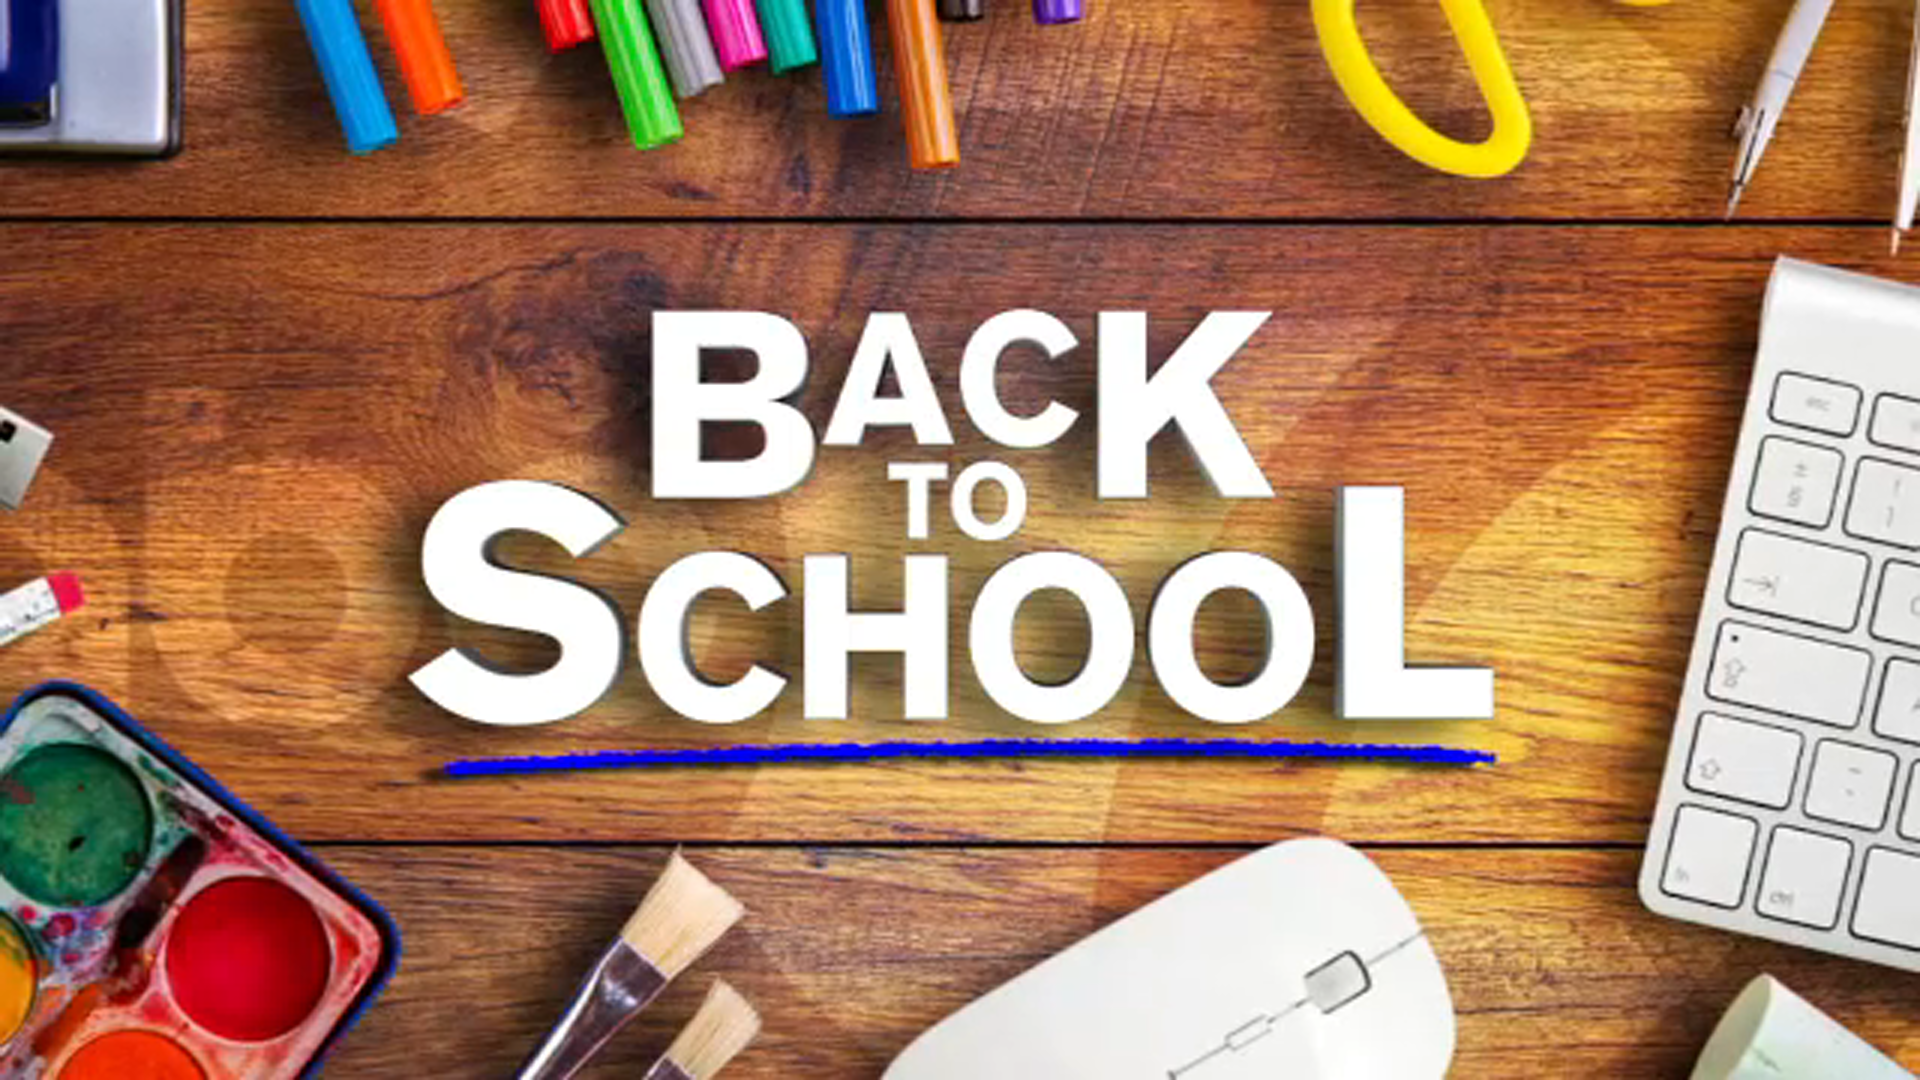 Back to School special: Returning to class in a new normal, budget